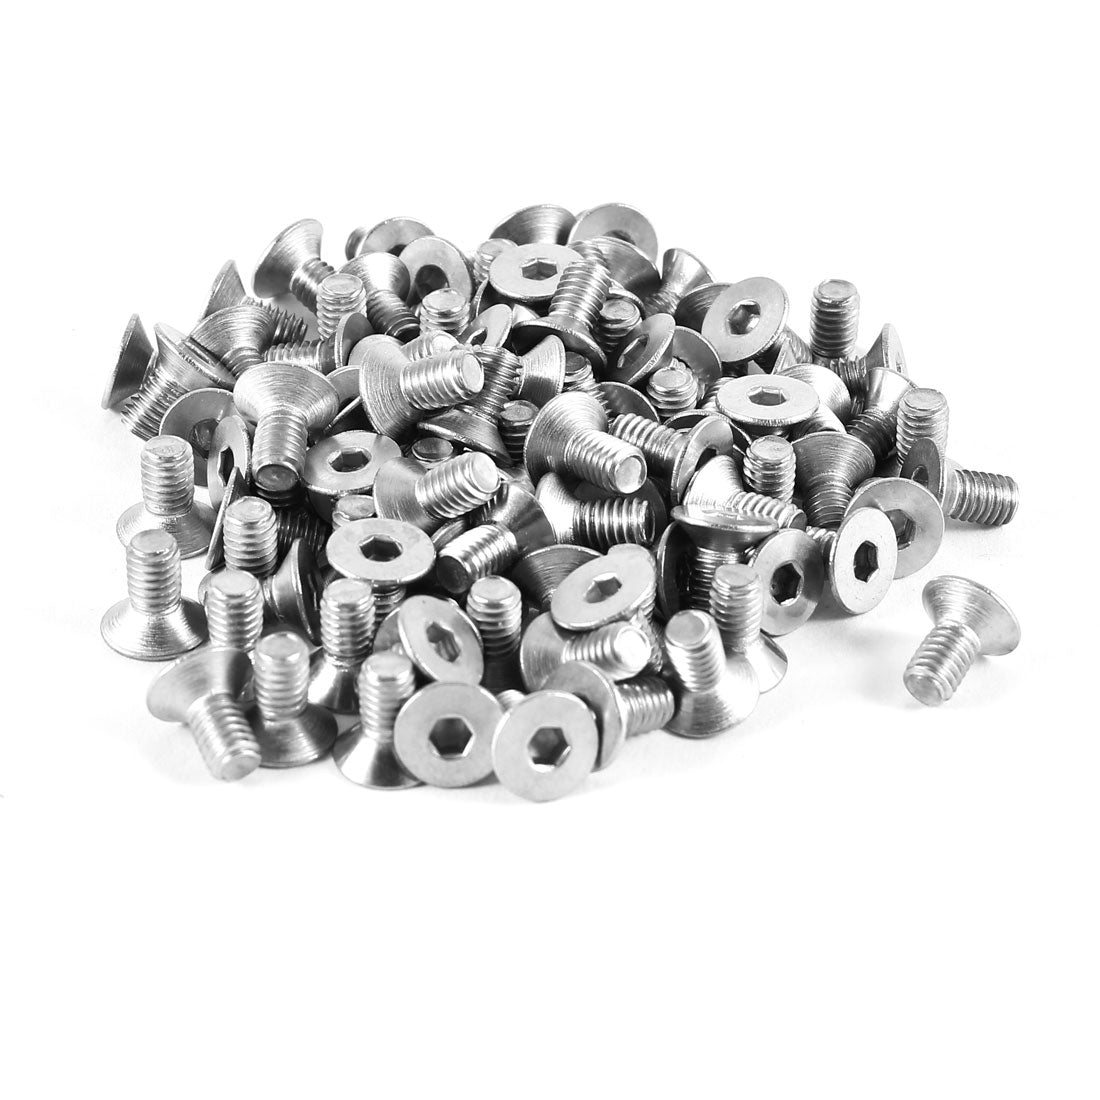 uxcell Uxcell 100 Pcs 304HC Stainless Steel Countersunk Hex Flat Head Hex Key Bolts Screws M4 x 8mm